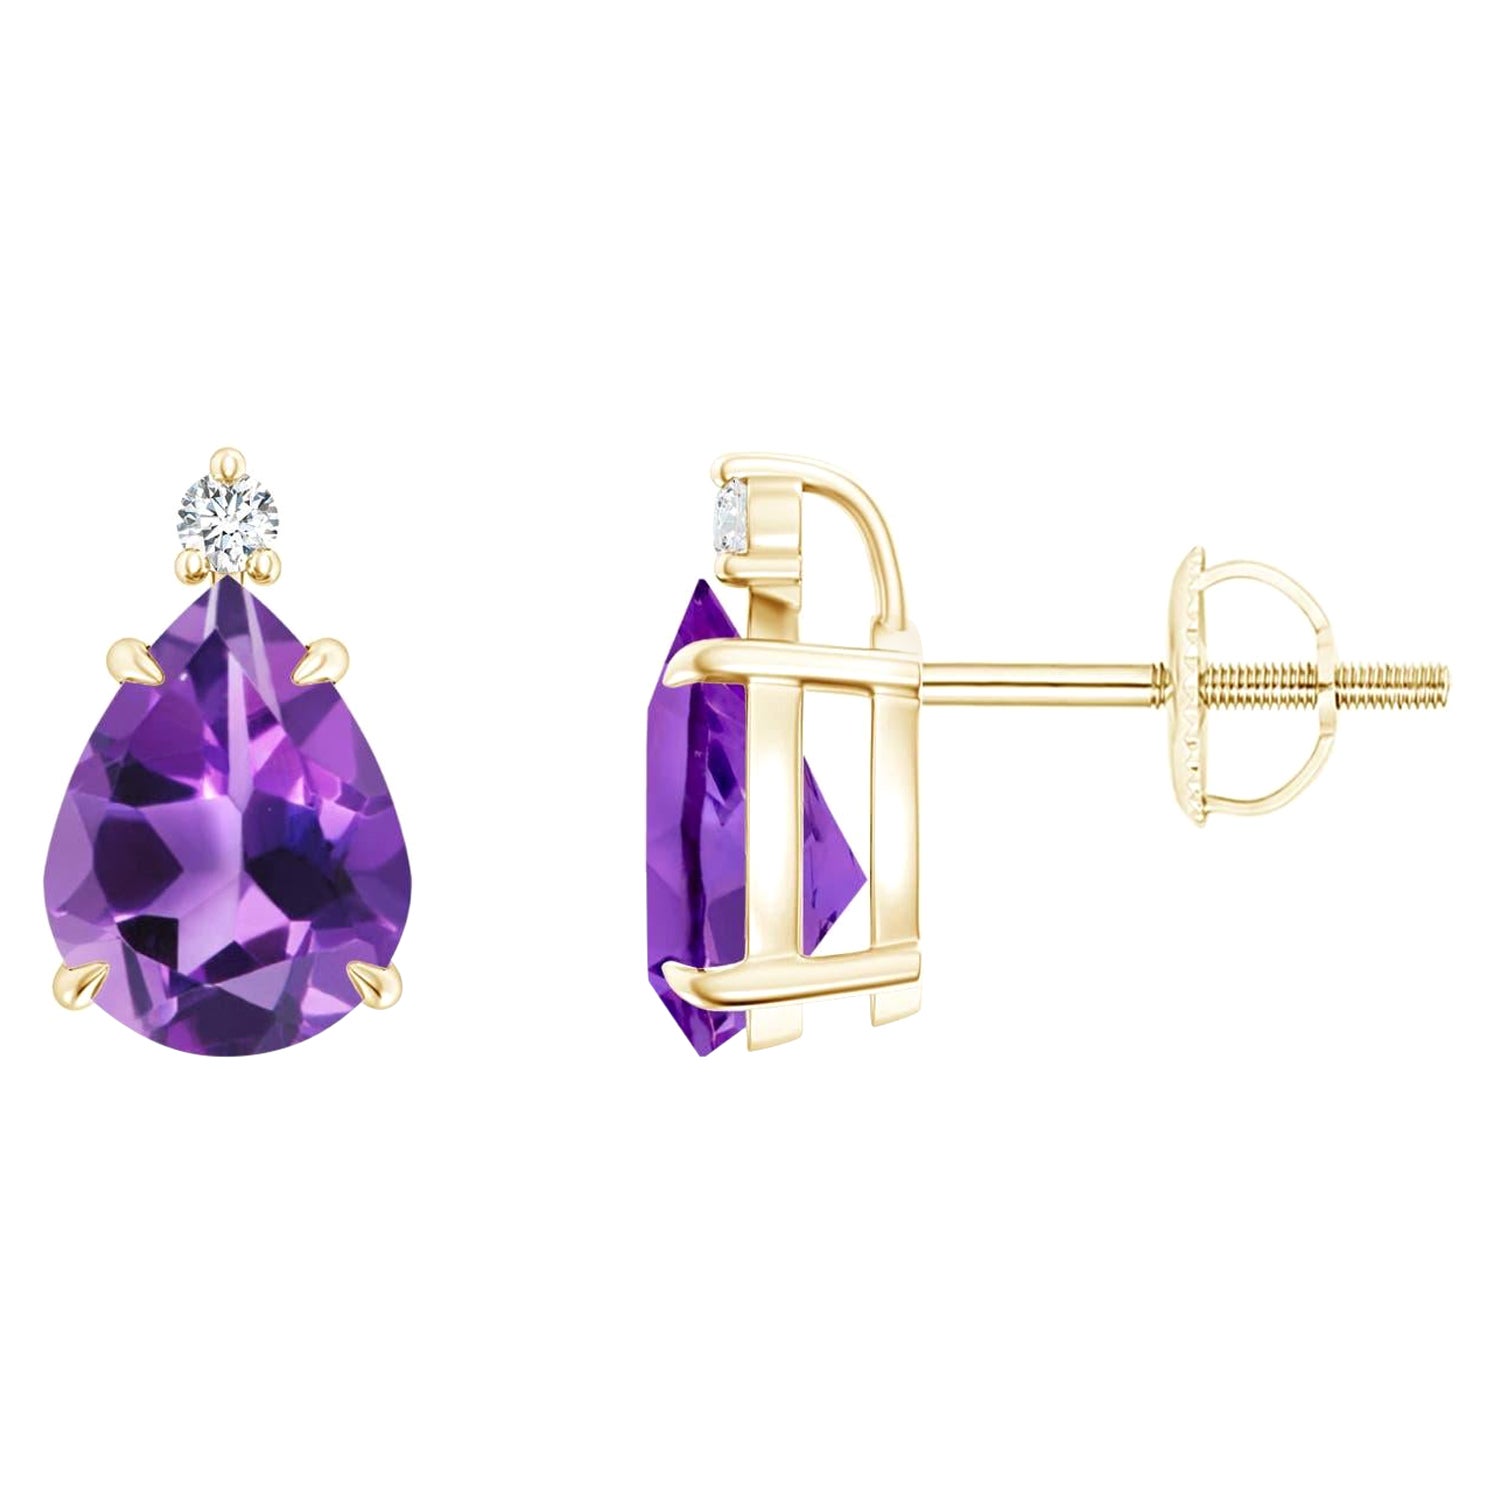 Natural Claw-Set Pear 2ct Amethyst Solitaire Earrings in 14K Yellow Gold